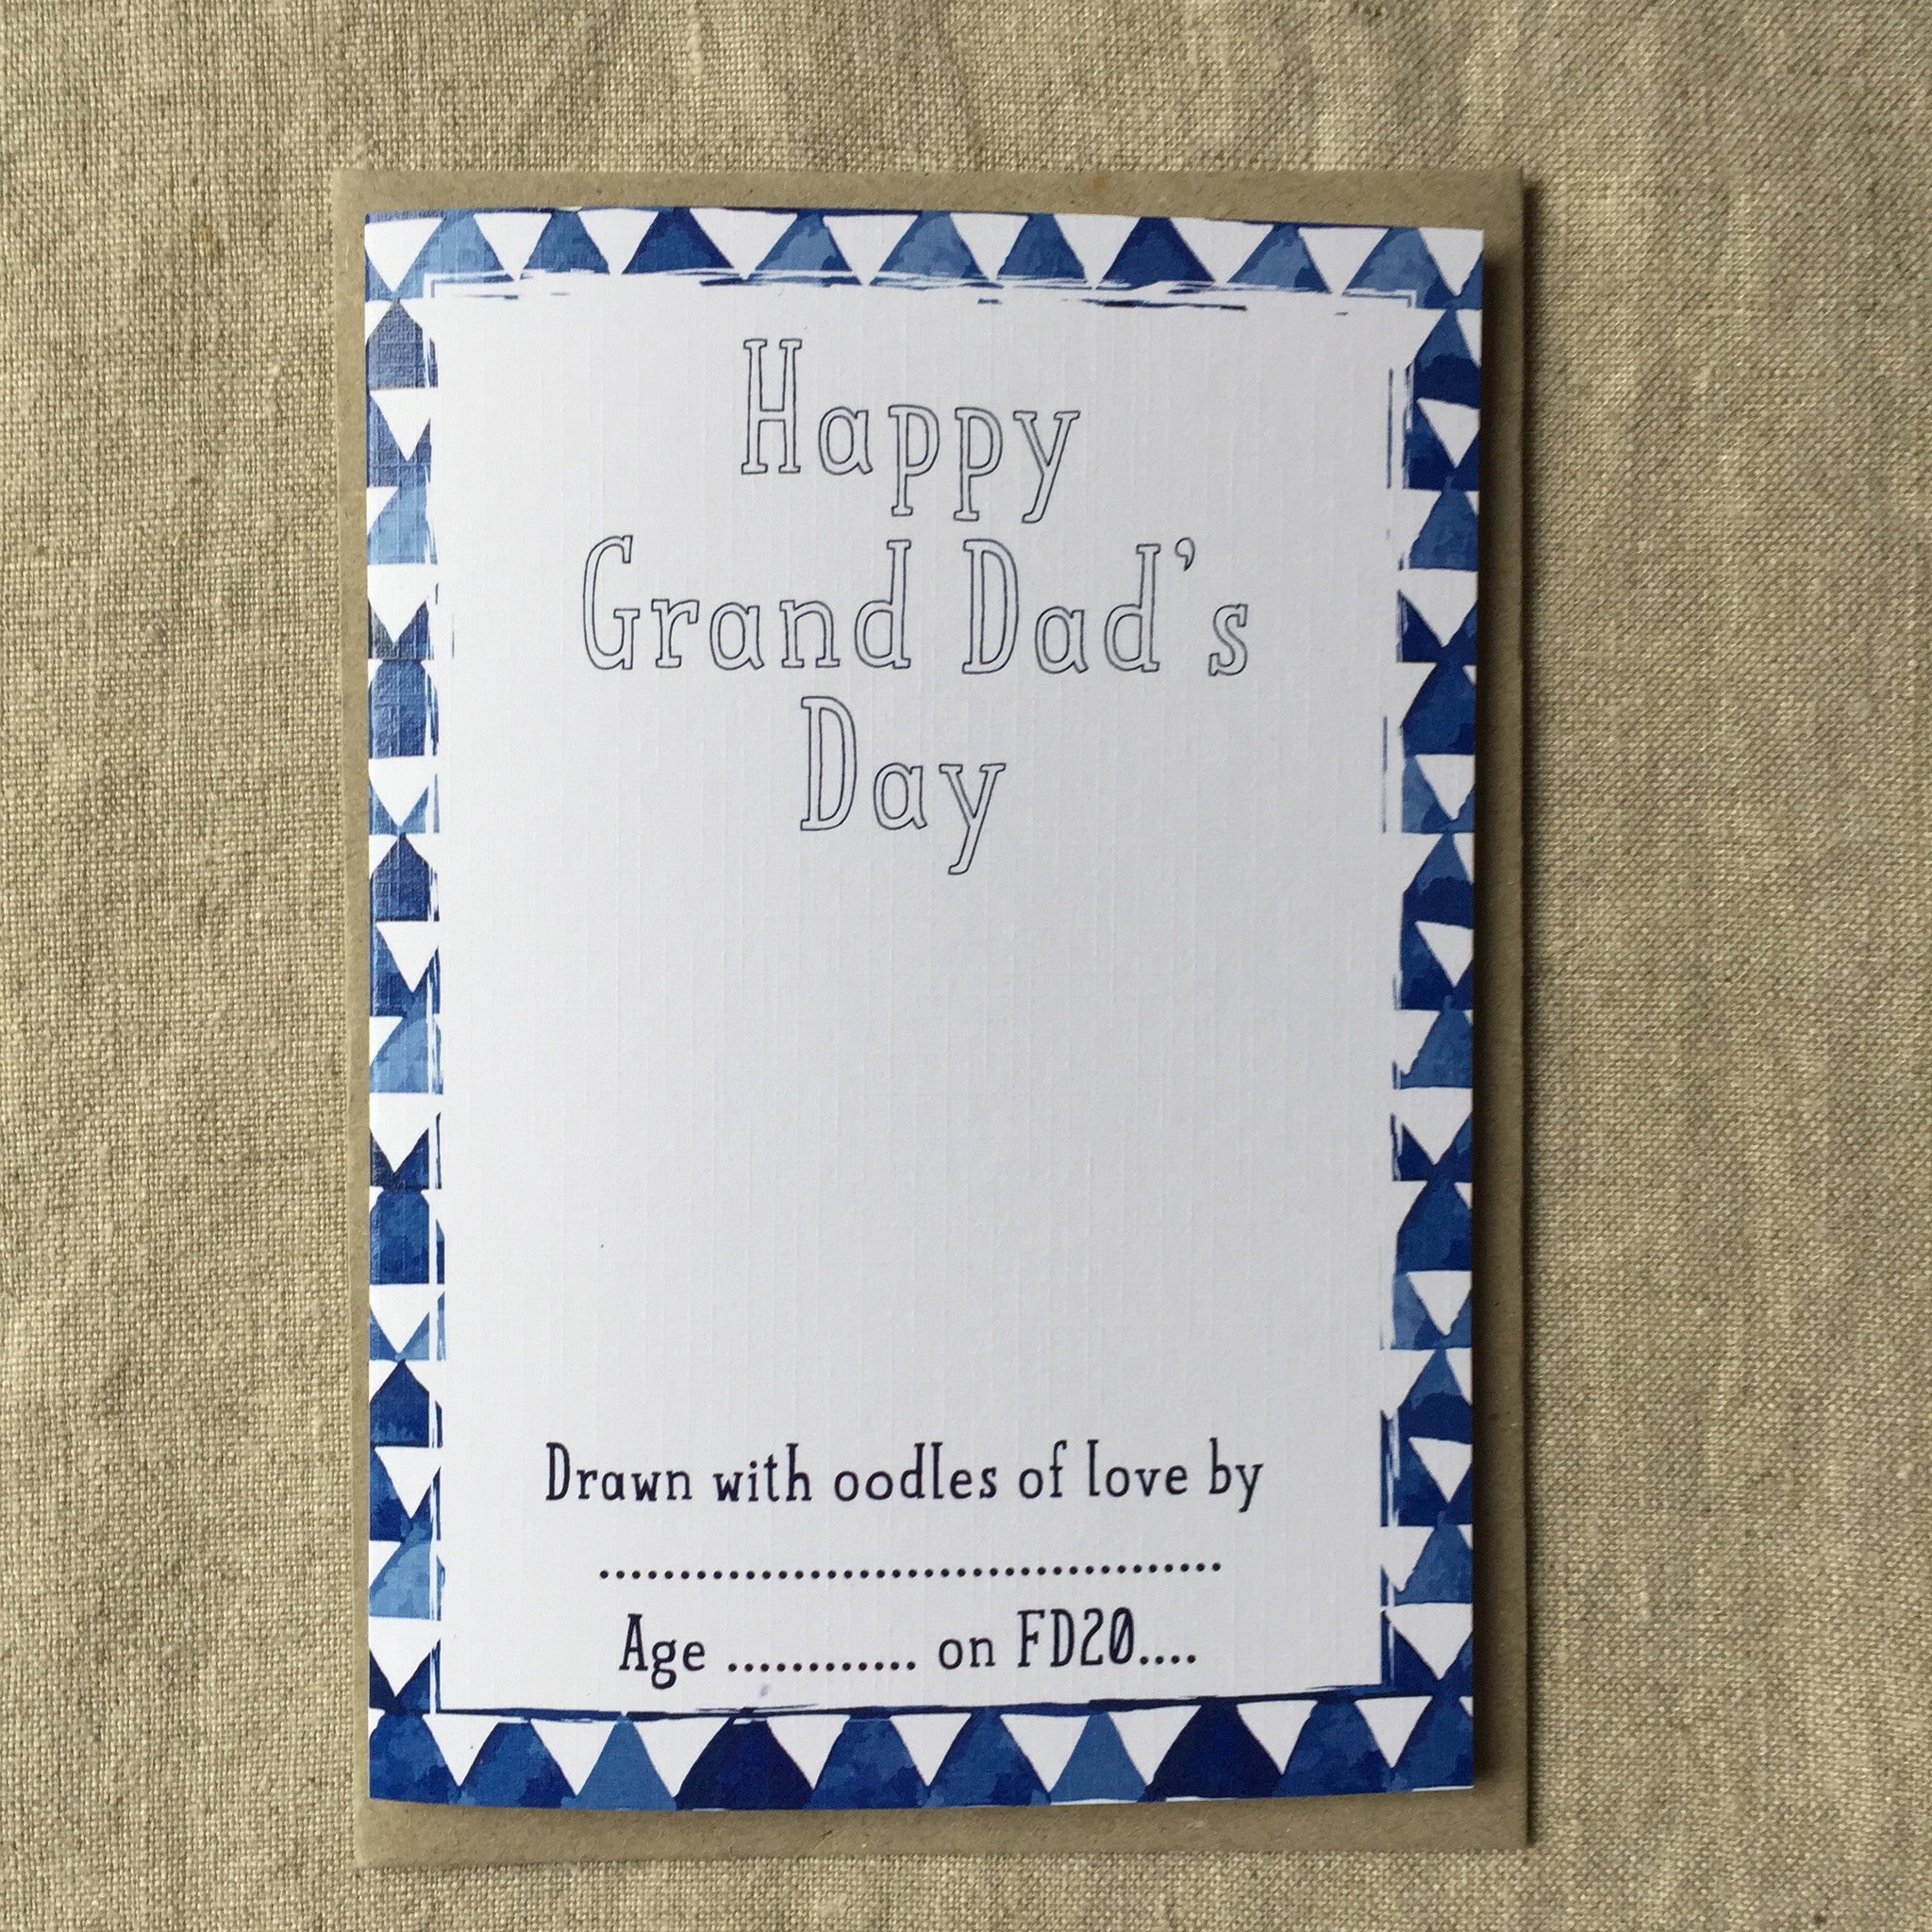 Let's Draw Happy Grand Dad's Day Card